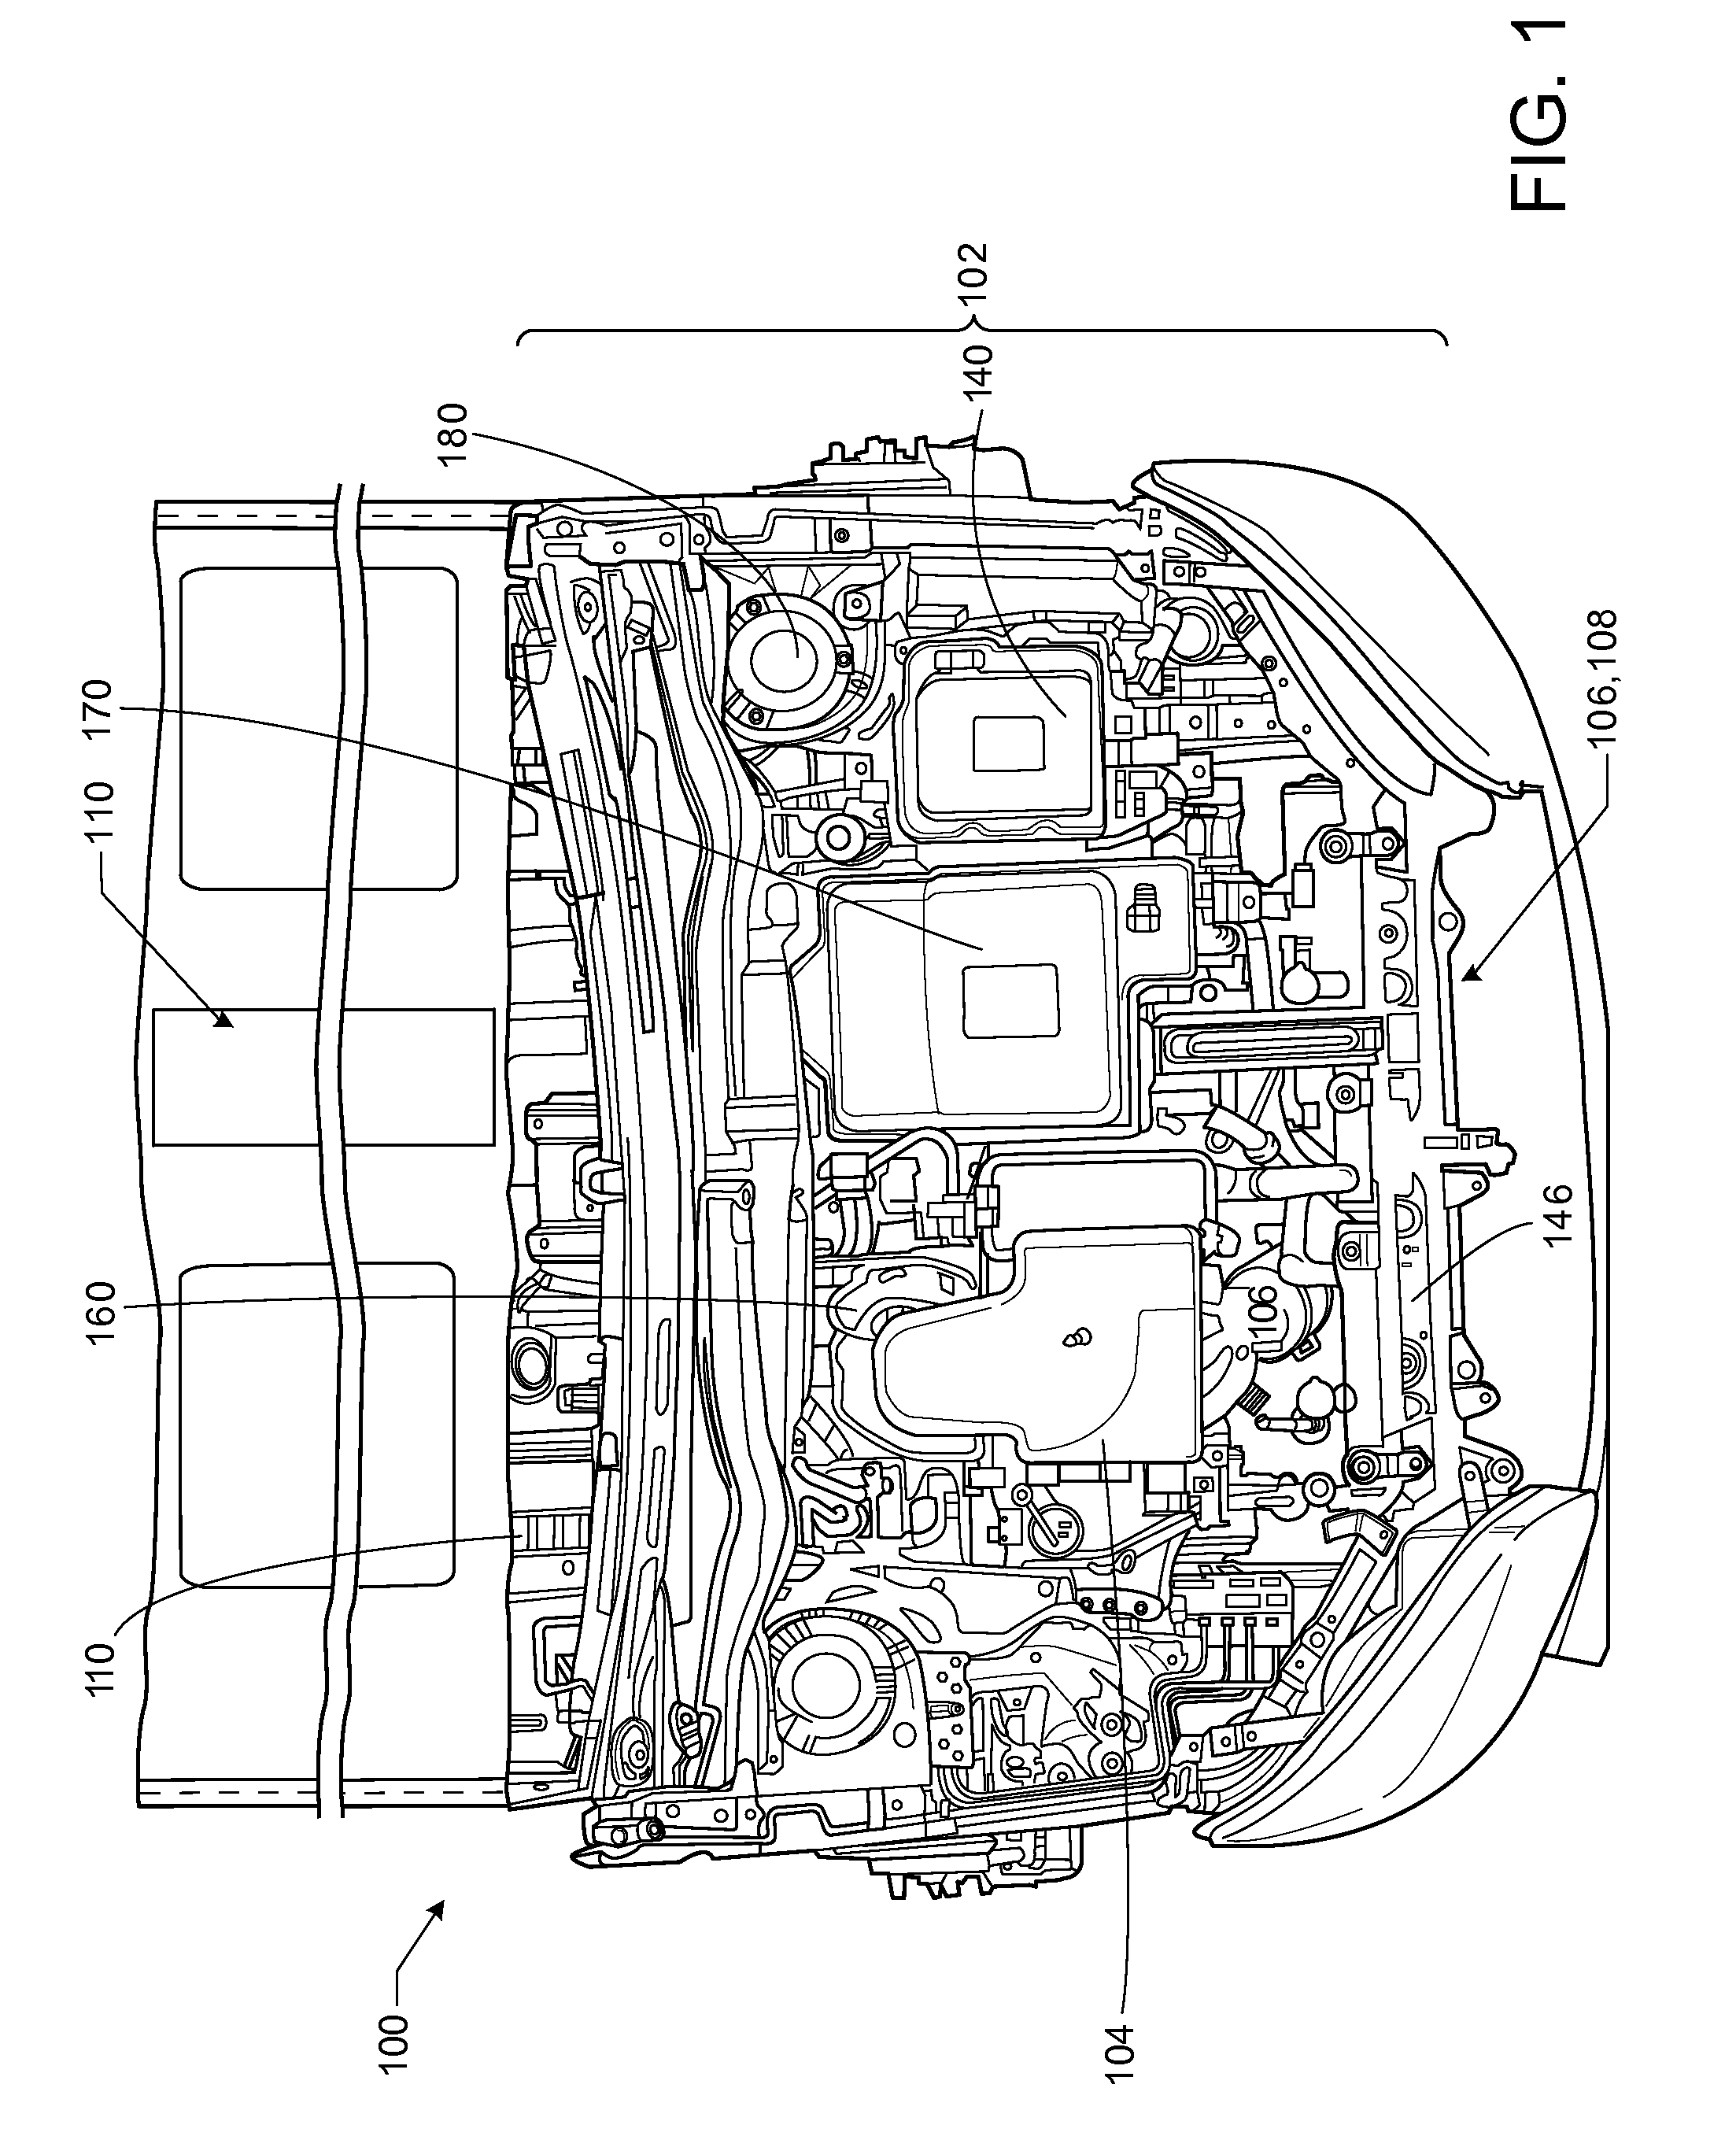 Hybrid Vehicle Having Torsional Coupling Between Engine Assembly And Motor-Generator